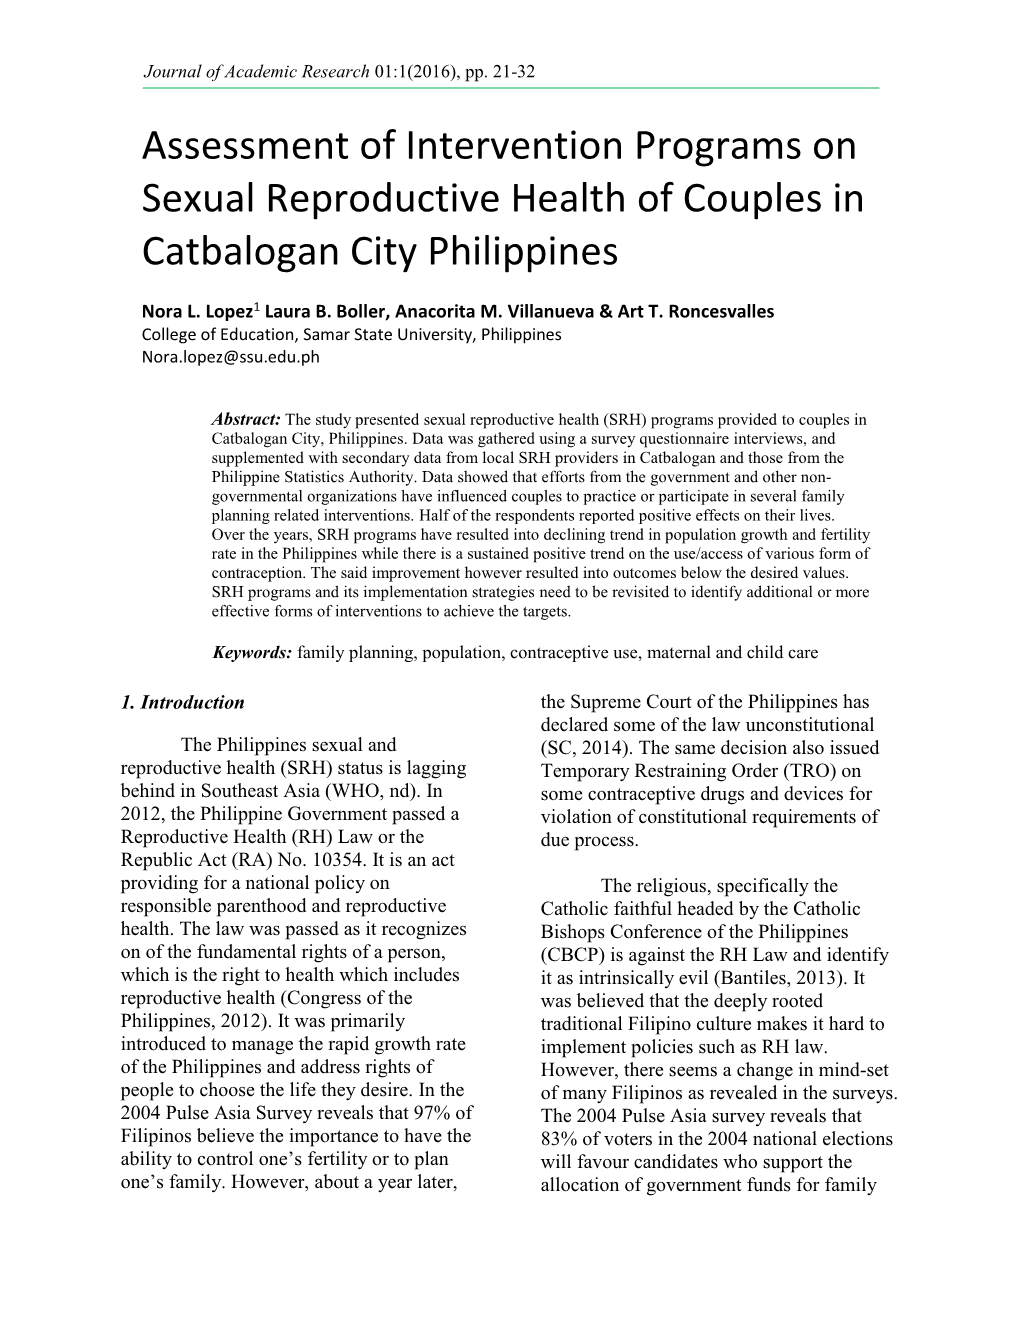 Assessment of Intervention Programs on Sexual Reproductive Health of Couples in Catbalogan City Philippines